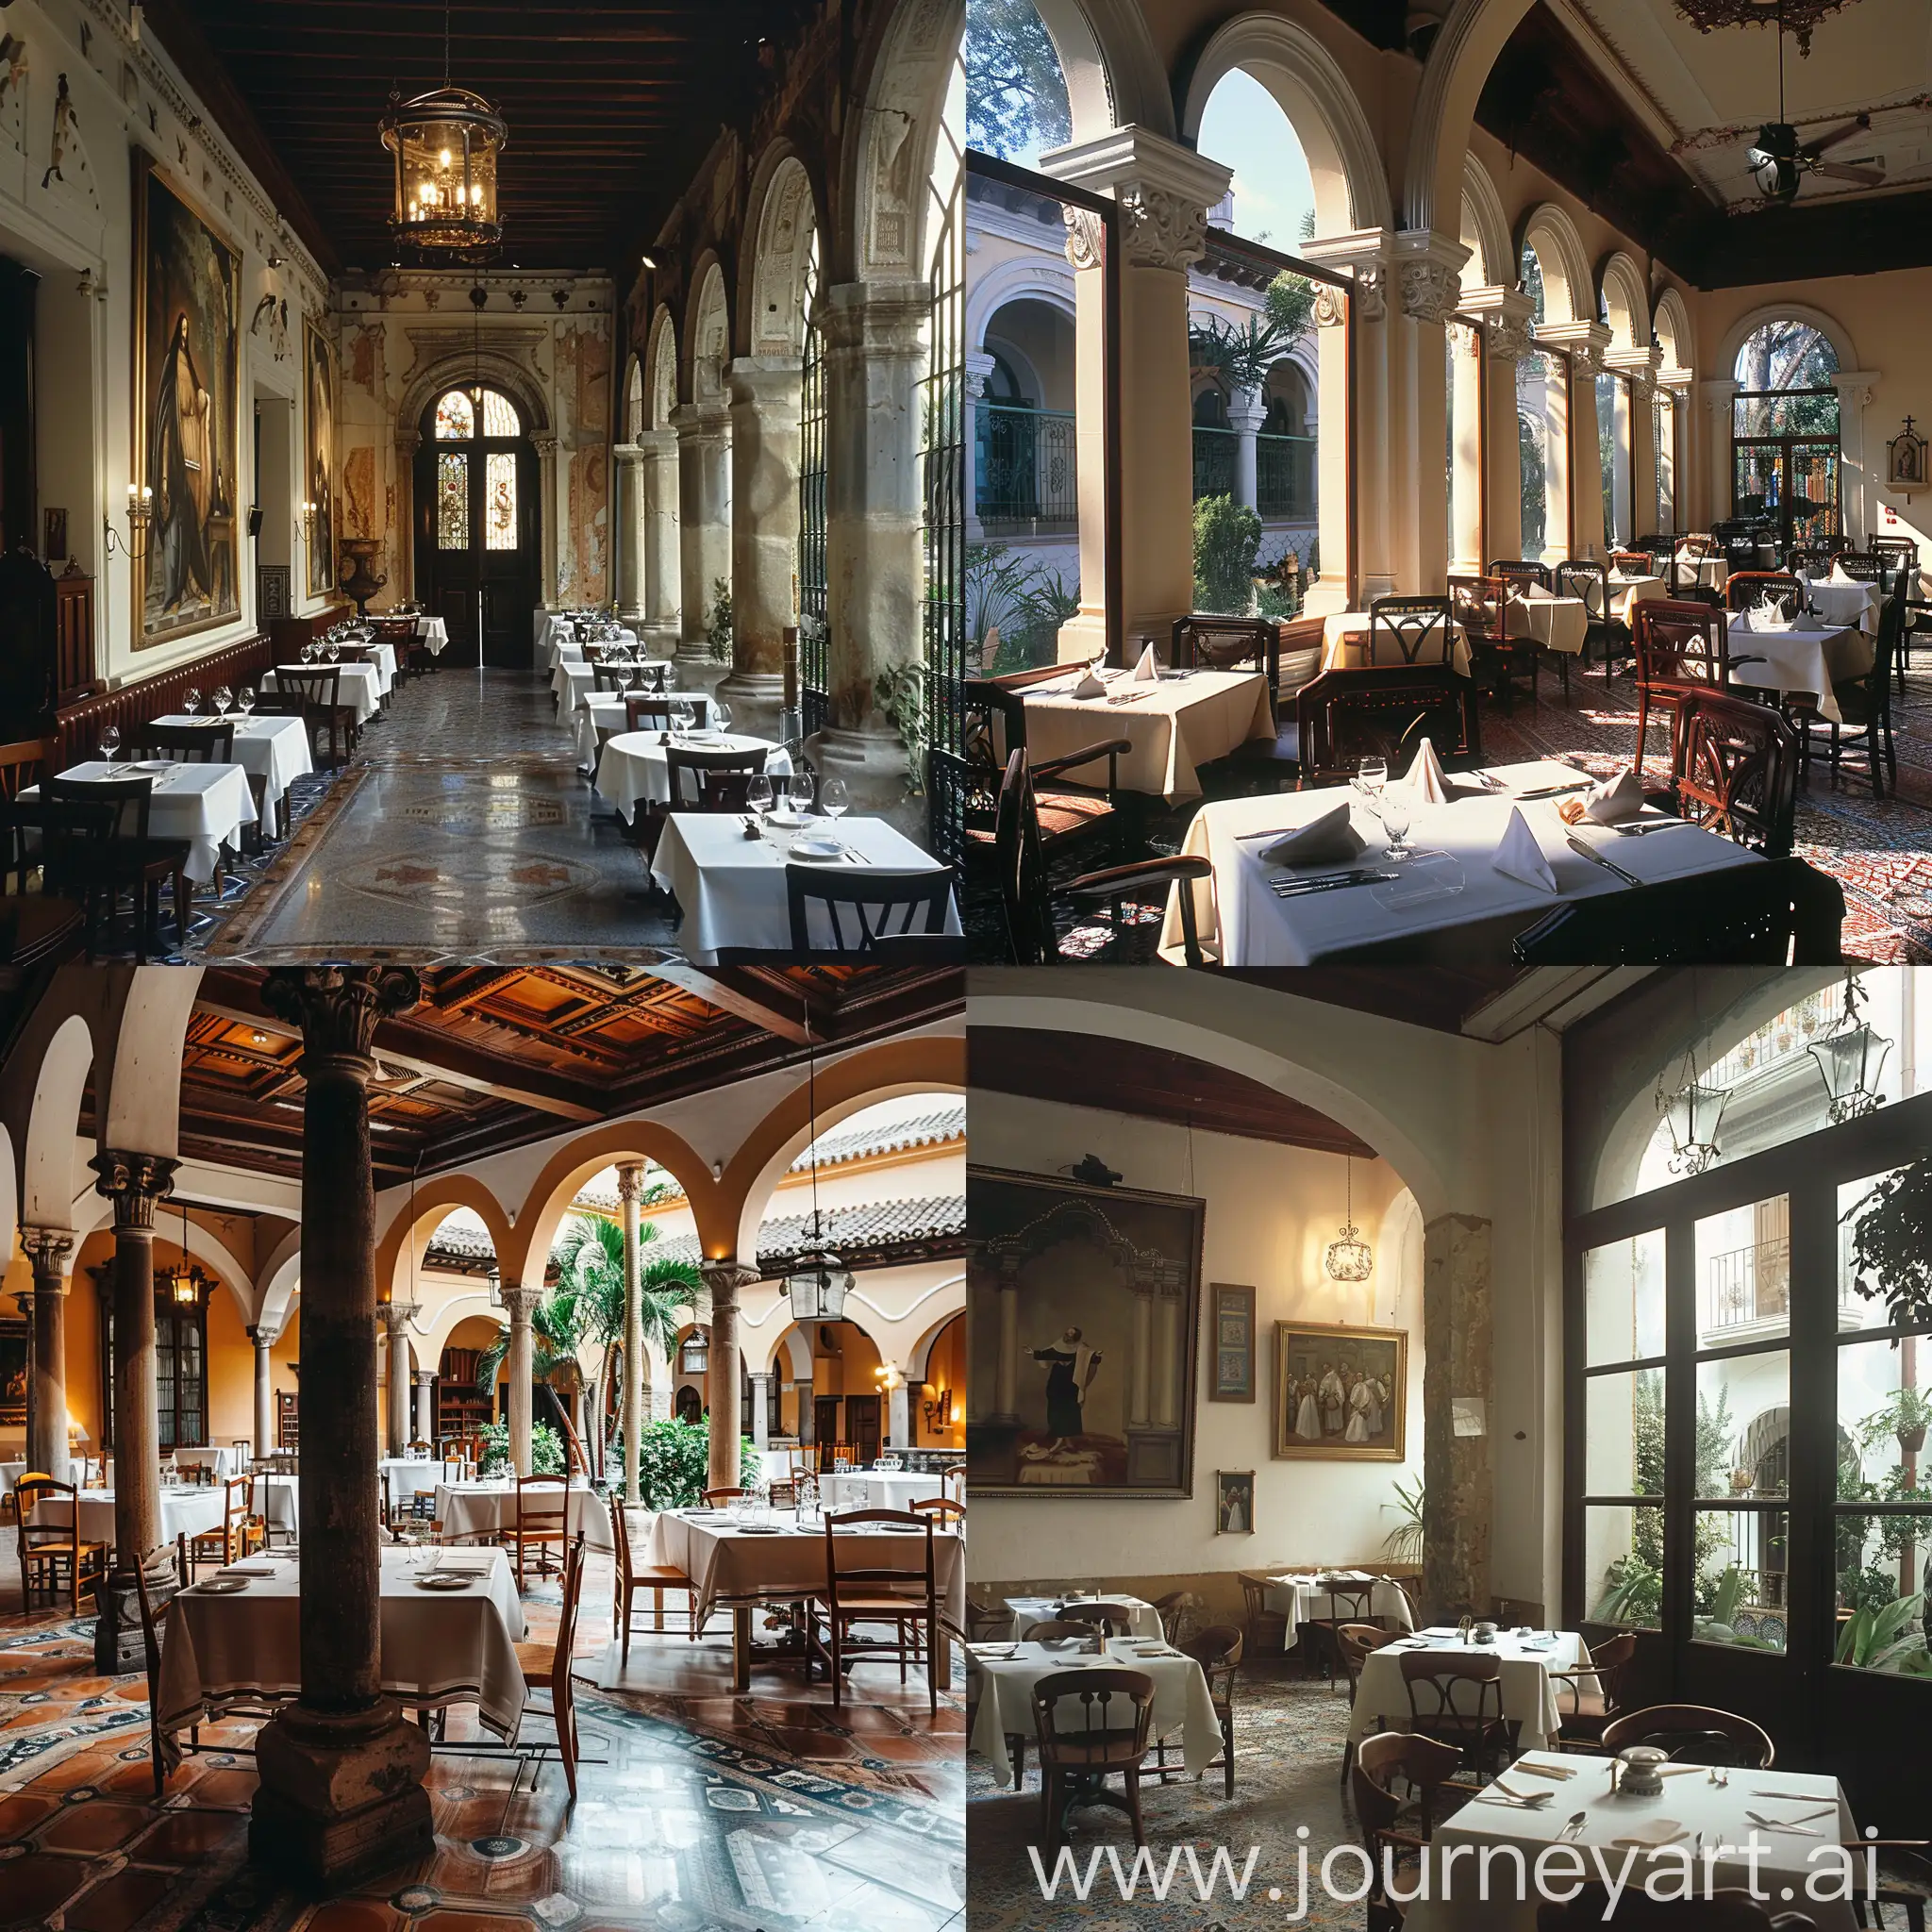 Modest-Spanish-Hotel-Dining-Room-with-Somber-Colors-Overlooking-Patio